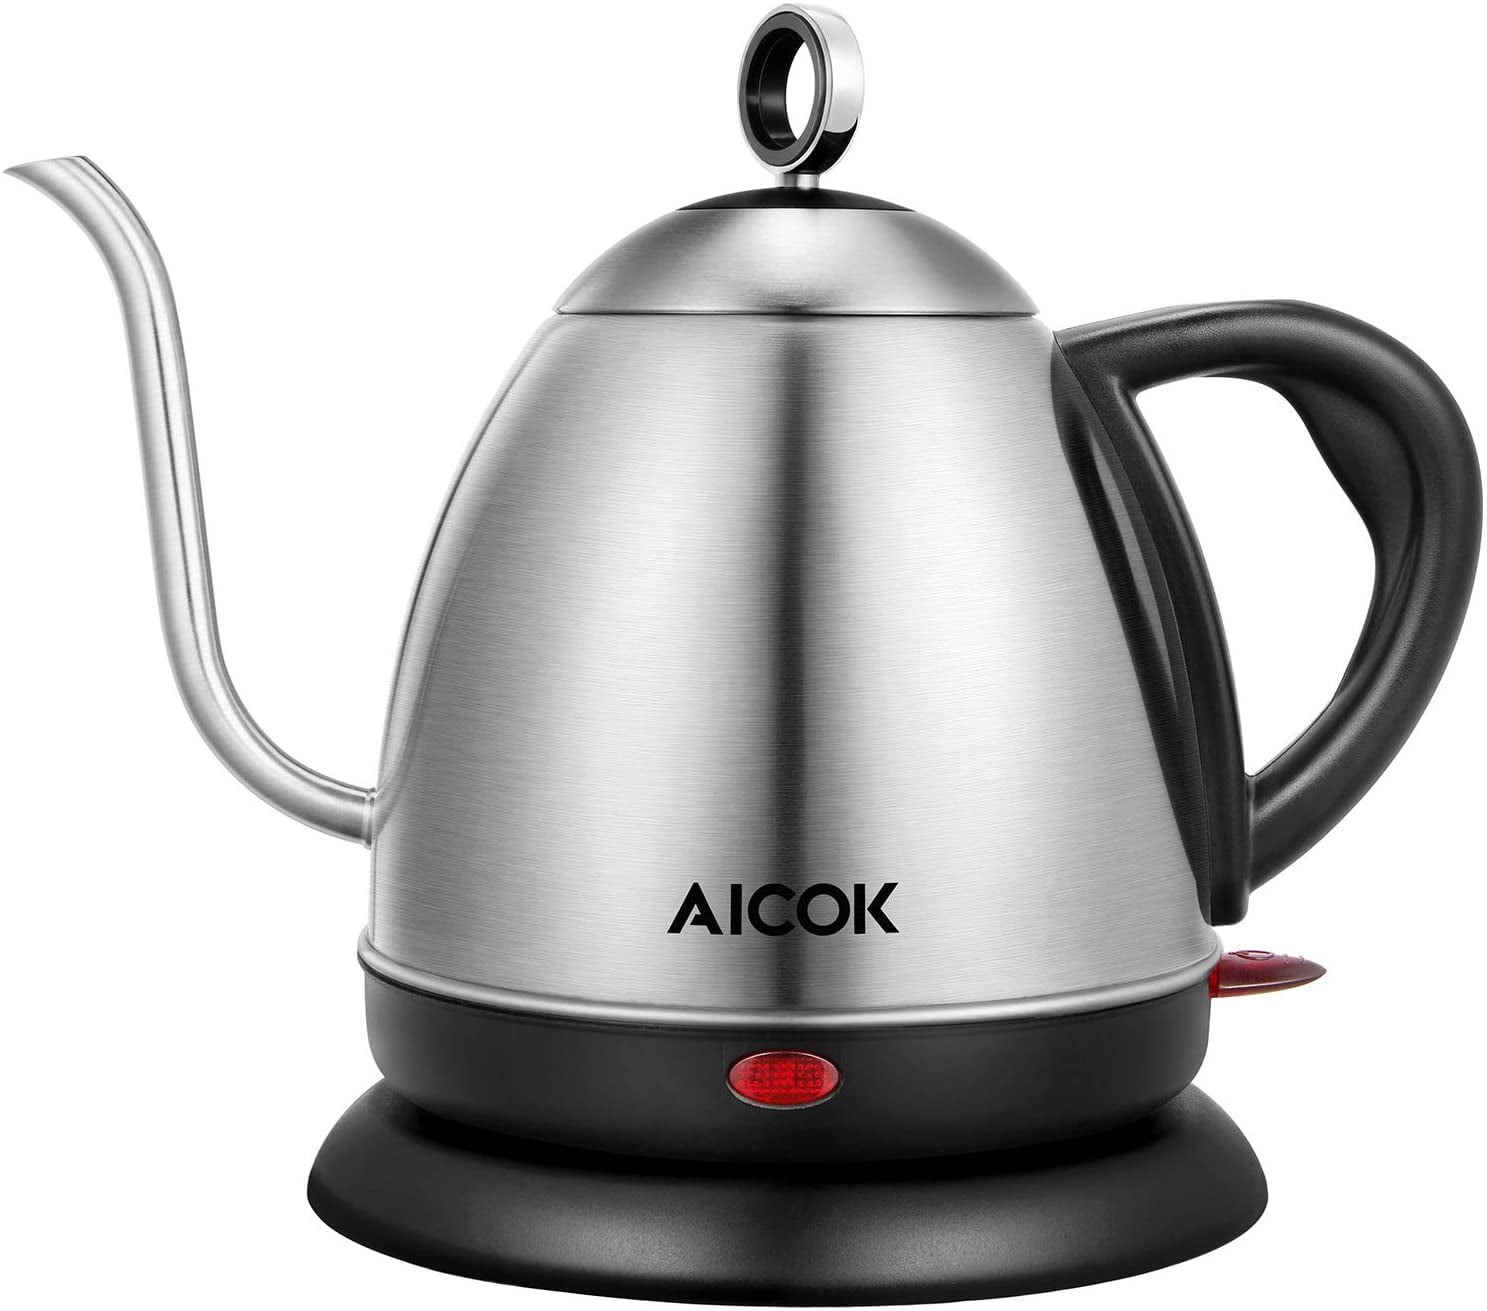 Check Out My NEW Aicok Cordless, Electric Kettle! ☕🍵  Wanted to show you  all my new Aicok cordless, electric kettle for coffee, teas, cocoa,  oatmeal, and more. 👉 GET ONE